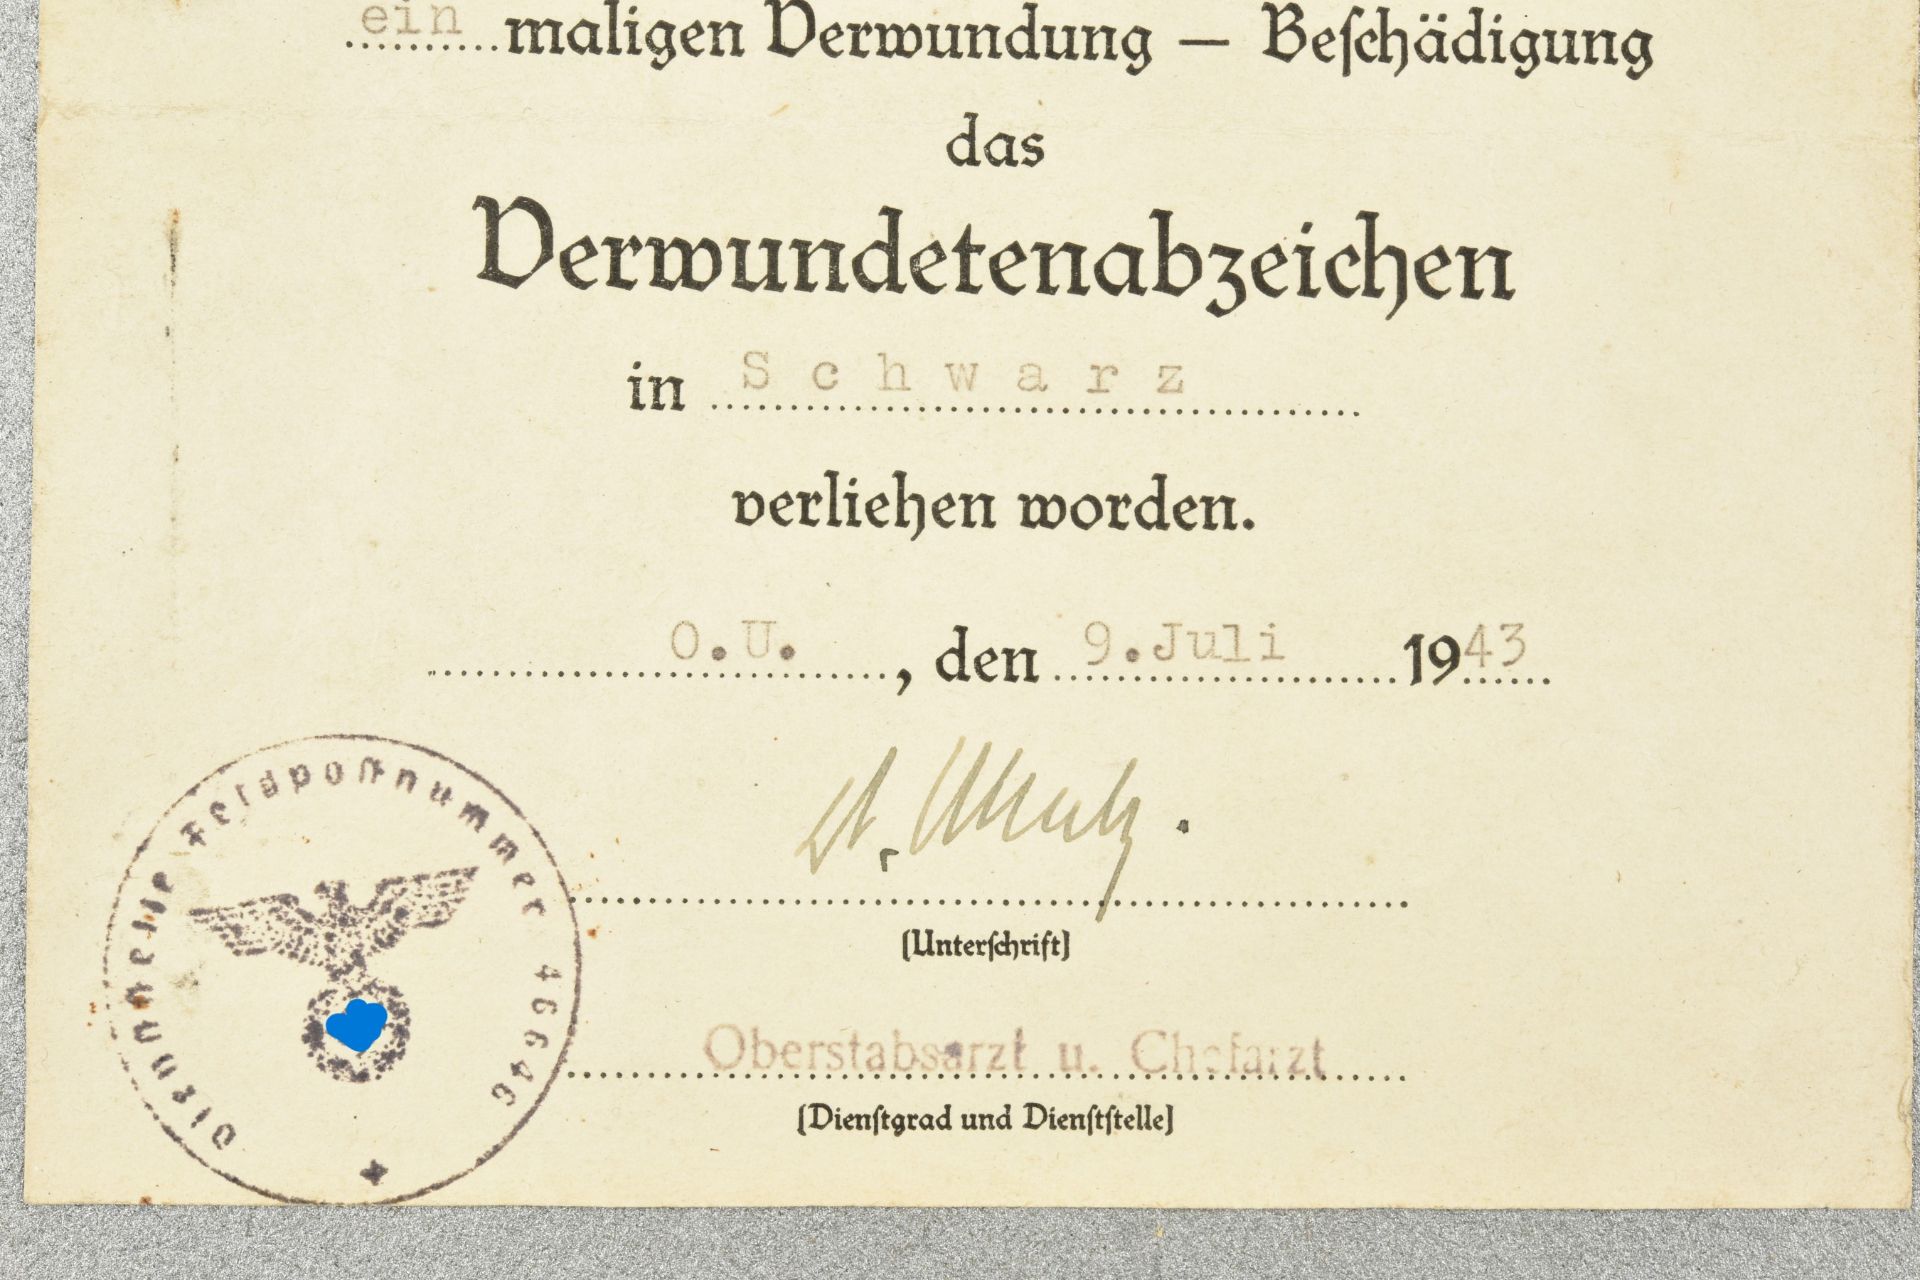 Diplome de la medaille des blesses. Diploma for the wounded. - Image 3 of 4